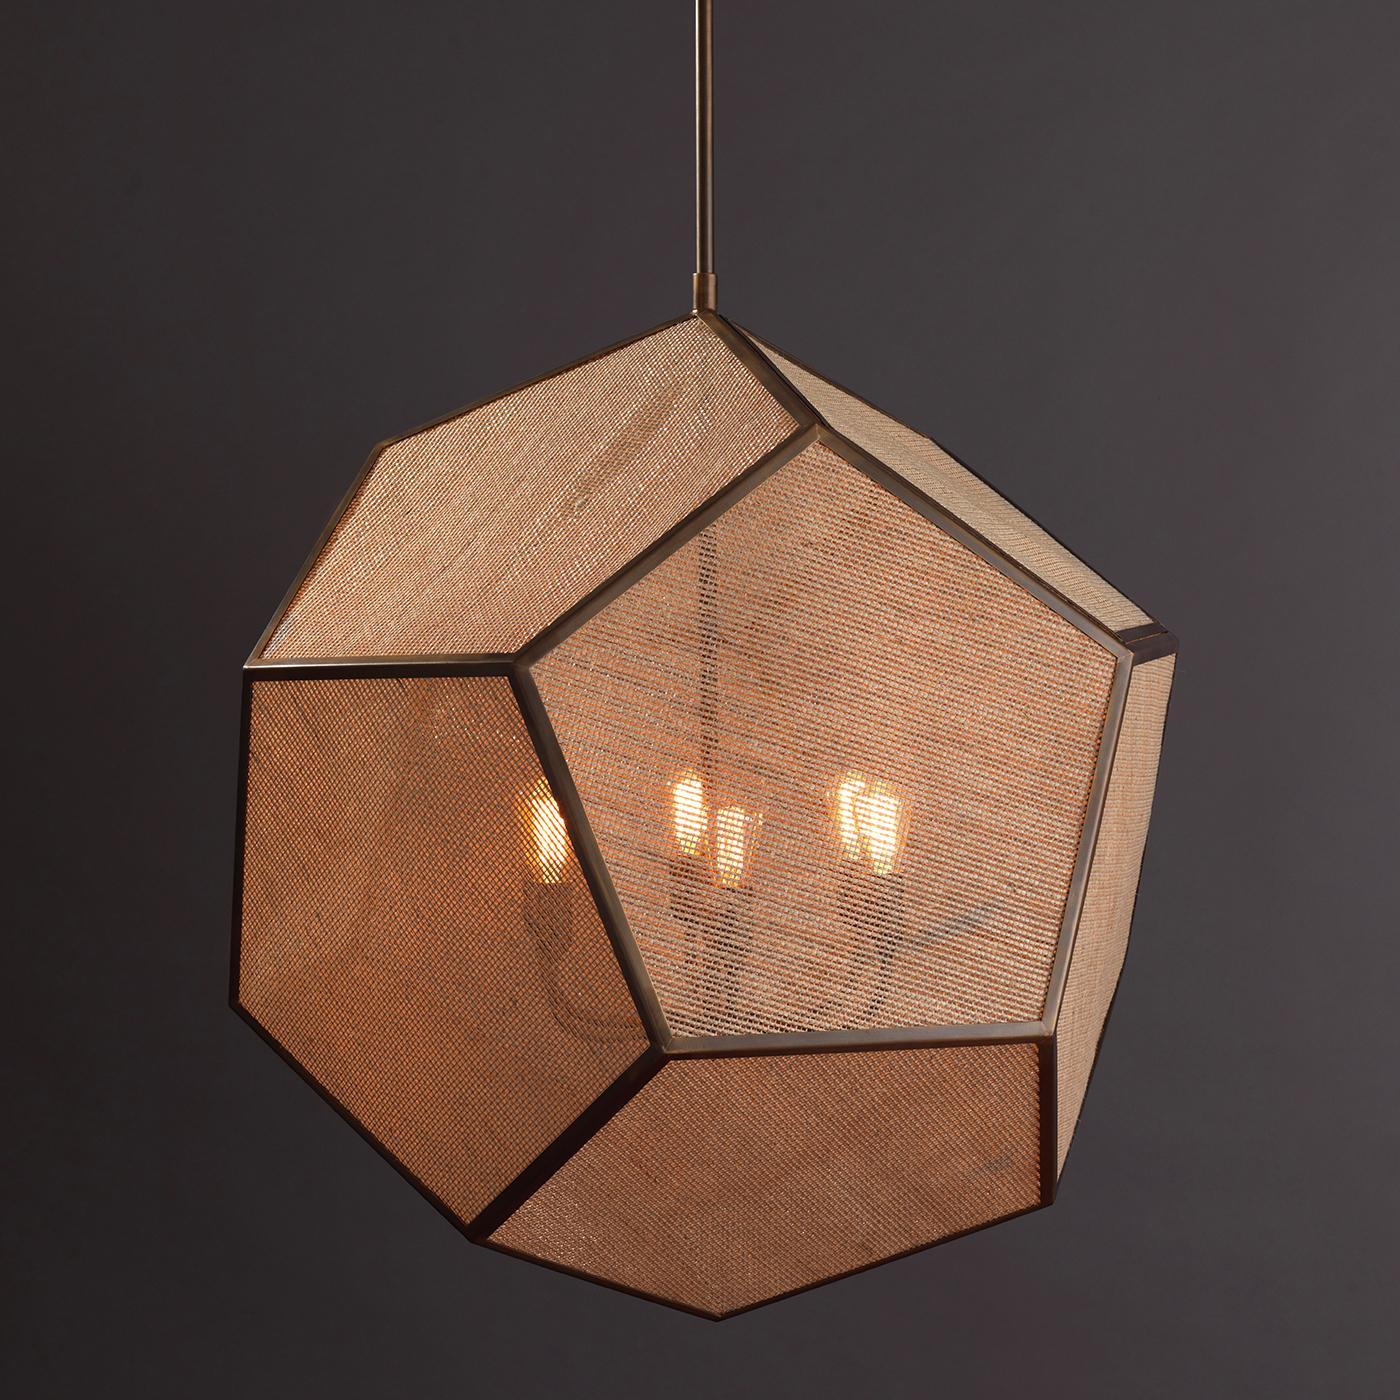 A rigorous geometry dominates the design of this striking chandelier of strong visual impact. The brass structure, shaped like a dodecahedron, features two pentagons connected in a three-dimensional silhouette covered in a stainless steel and jute